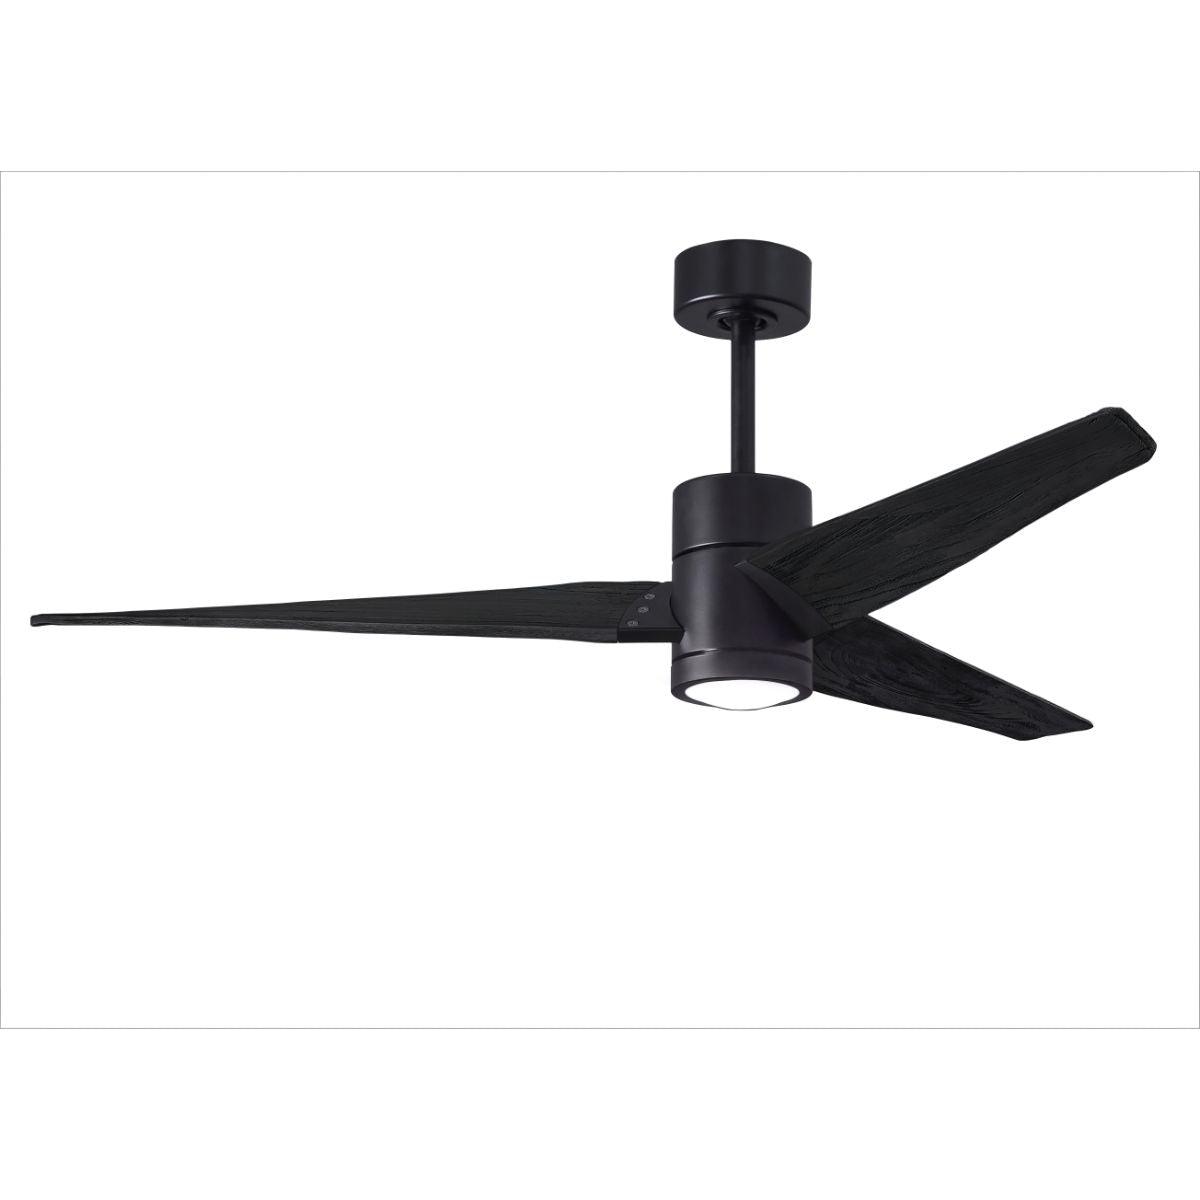 Super Janet 60 Inch Outdoor Ceiling Fan With Light, Wall And Remote Control Included